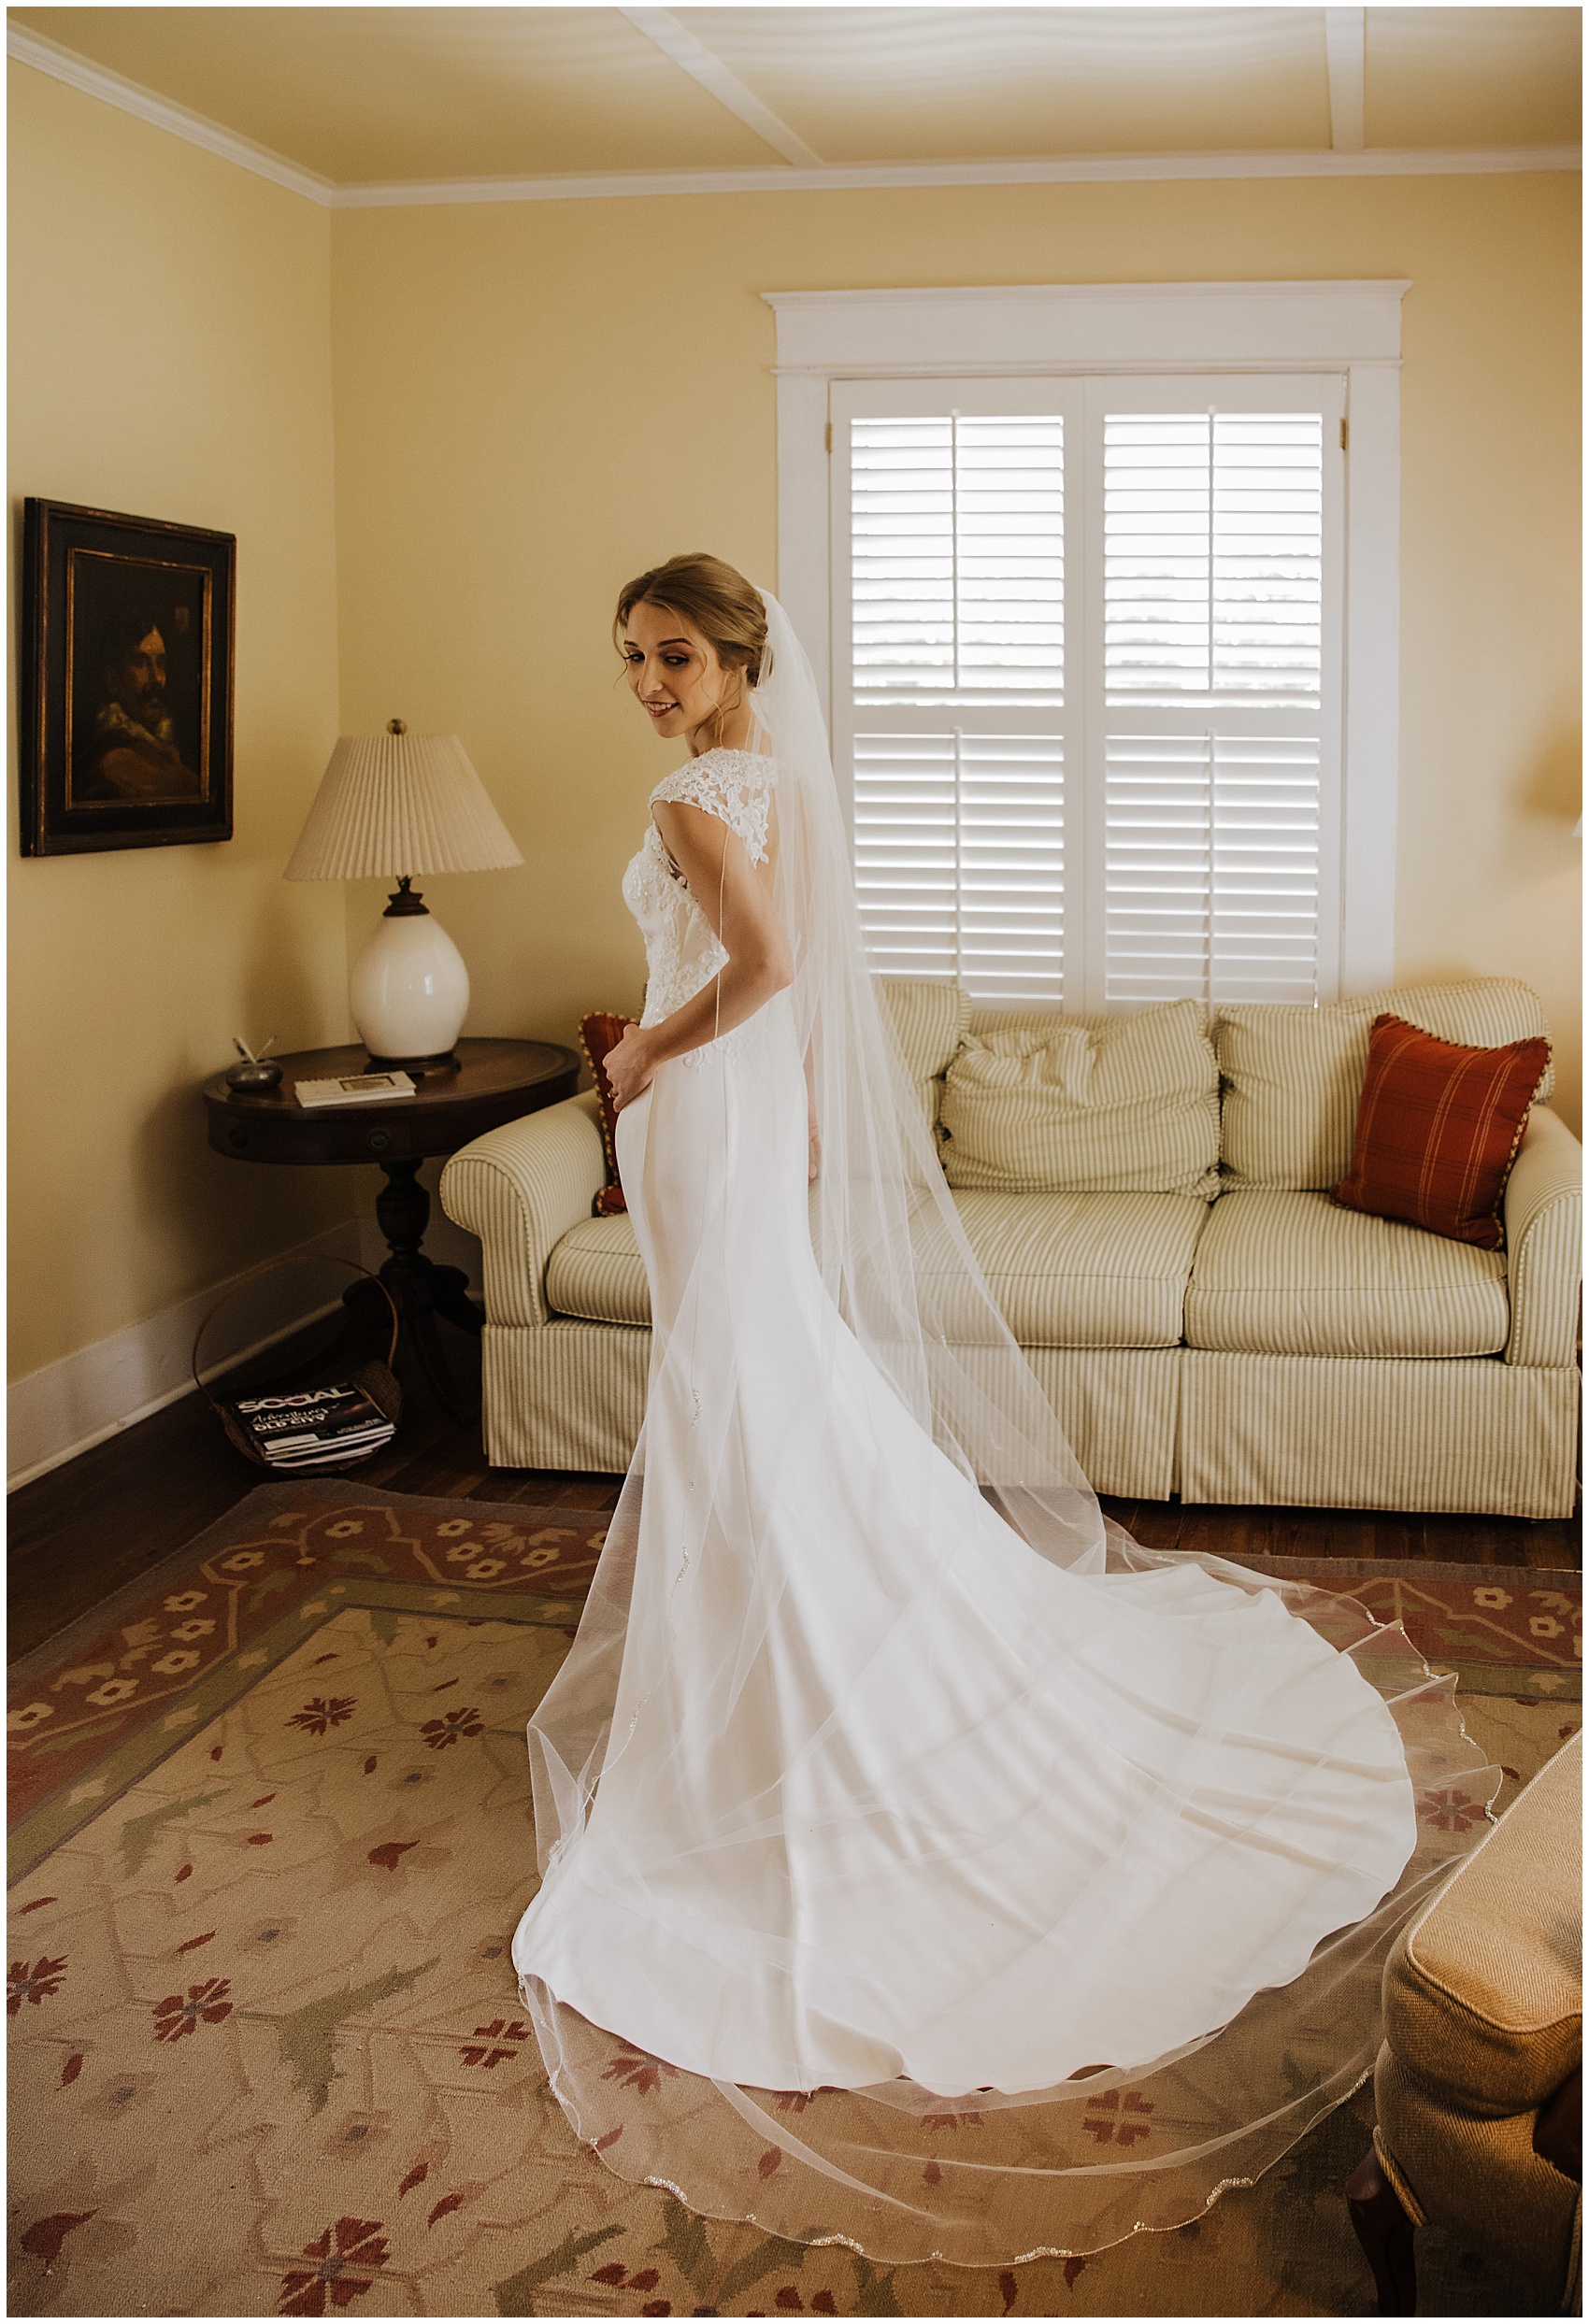 A bride stands in the getting ready room smiling over her shoulder to her train and veil stretched out